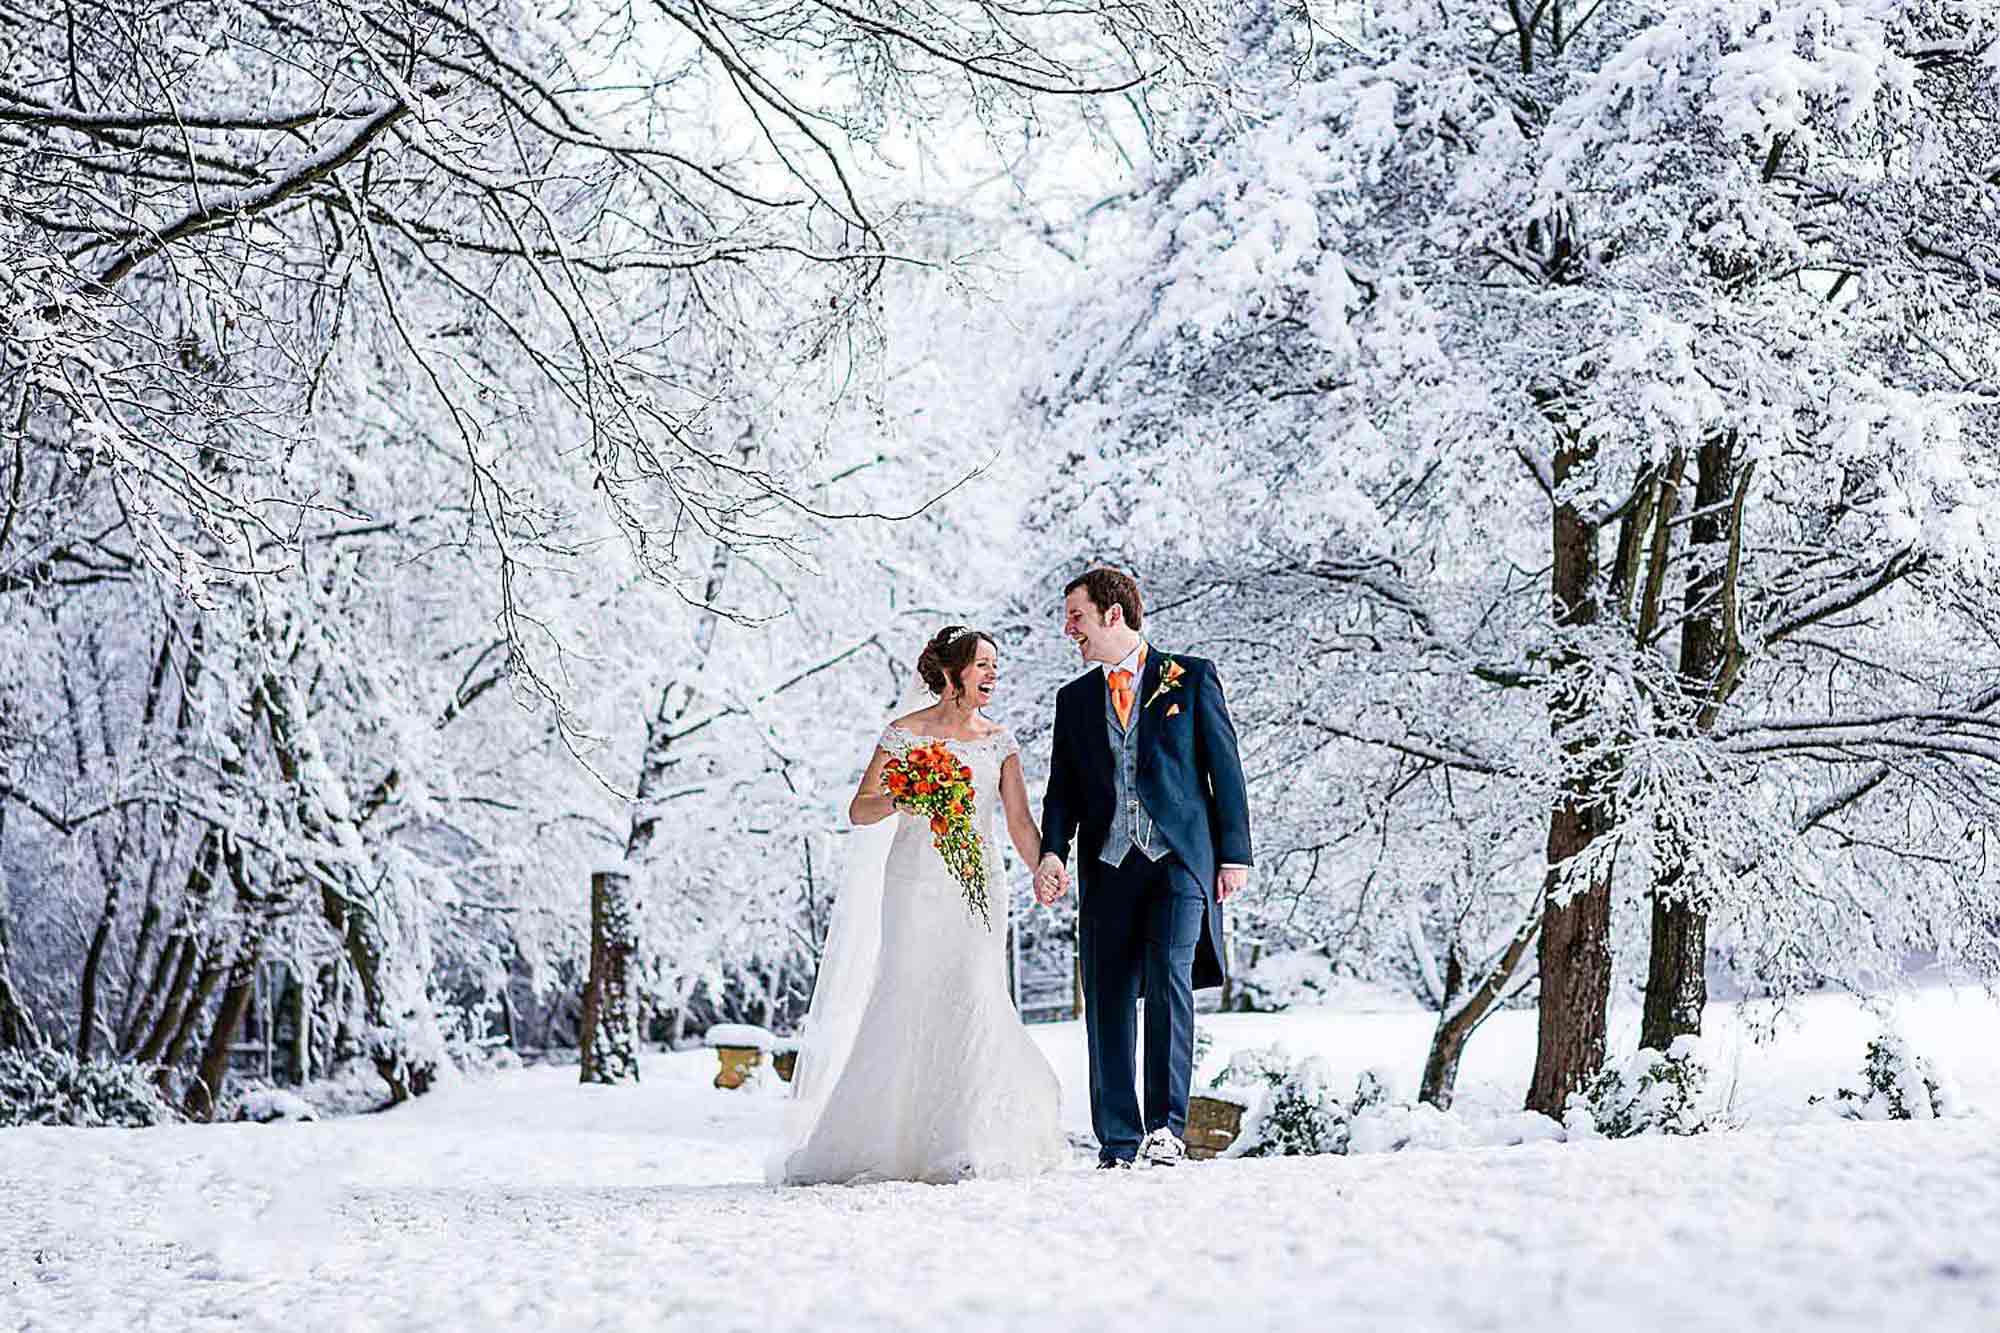 Featured image for “Winter Wedding Season”